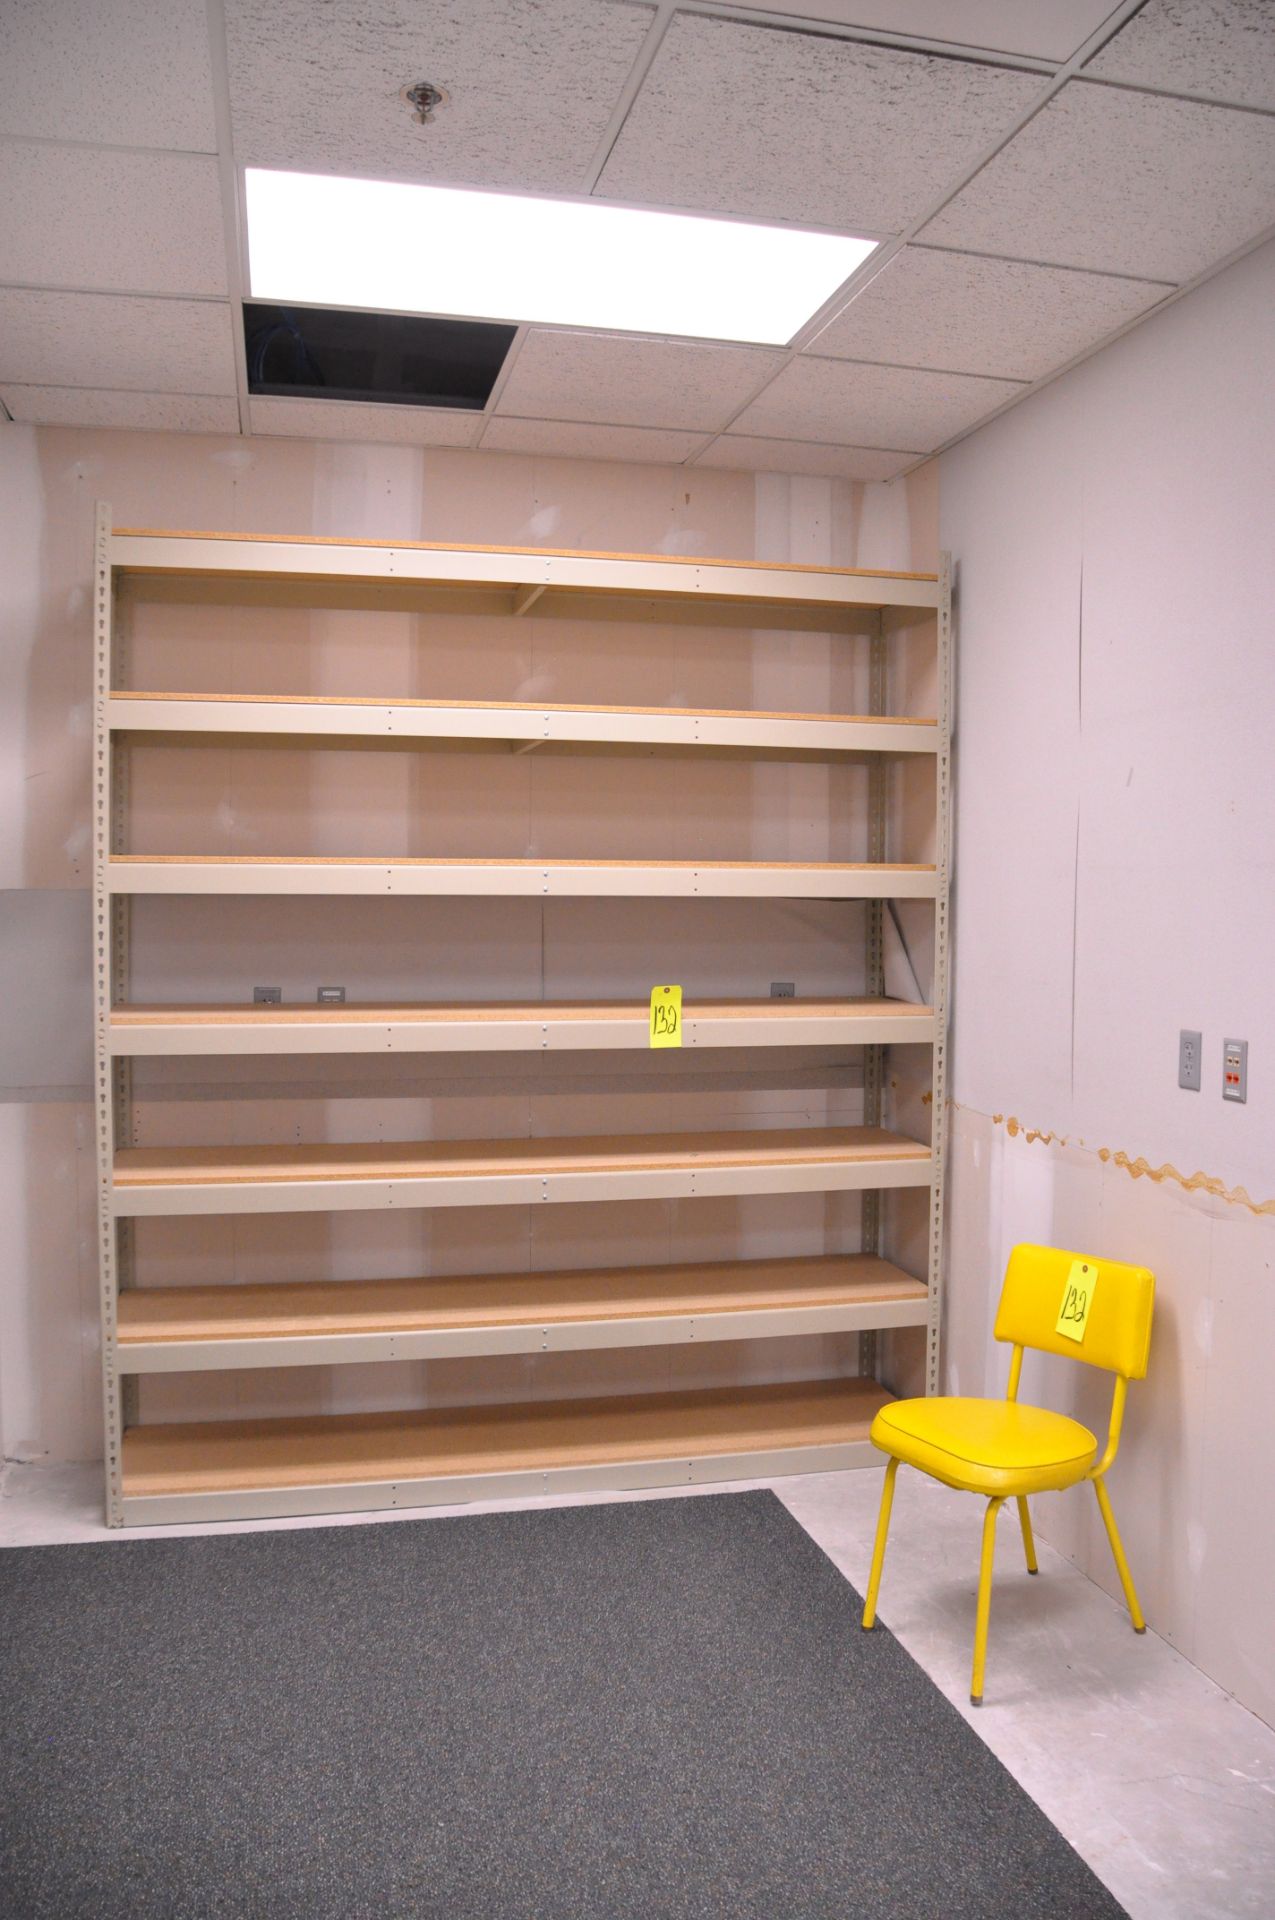 Lot-(1) 84" x 18" x 96"H Section Shelving, (1) 4-Drawer Lateral File Cabinet, and (2) Various Chairs